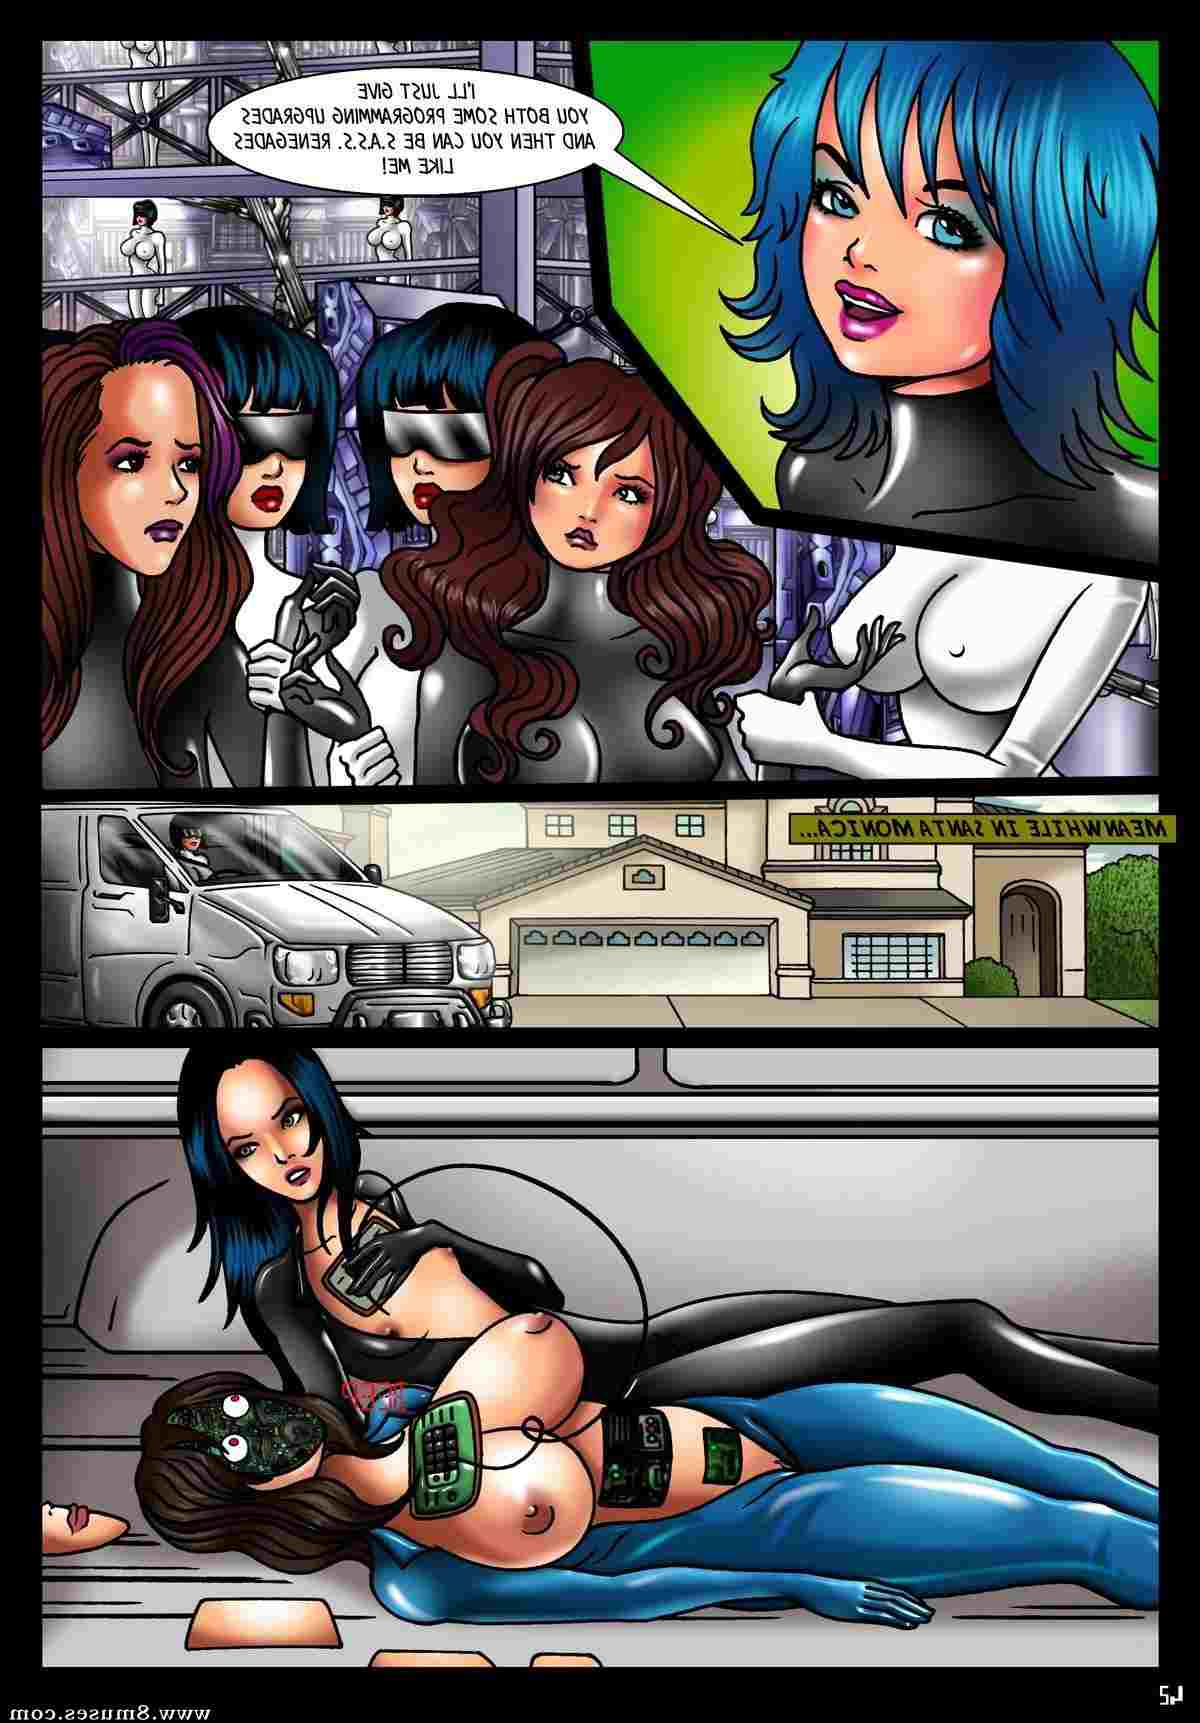 Various-Authors/AB-Lust/Shemale-Android-Sex-Sirens-Renegades Shemale_Android_Sex_Sirens_-_Renegades__8muses_-_Sex_and_Porn_Comics_43.jpg